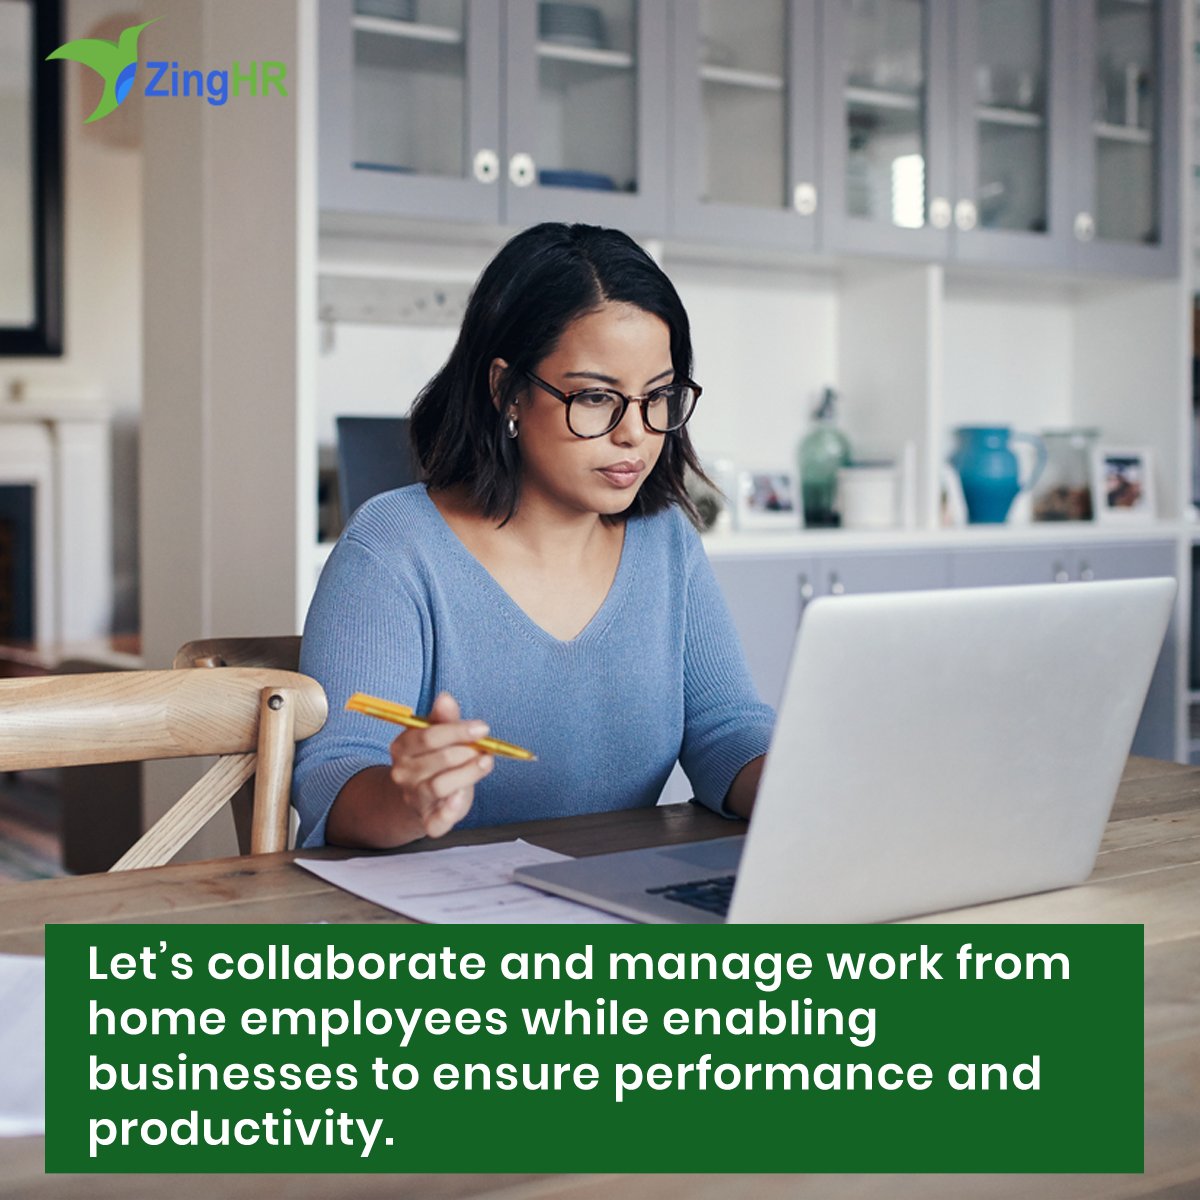 ZingHR software has features like Geo-fencing, Mobile-based Punch-in/out, or QR code-based attendance or IP based restrictions. This helps for situations like Work from Home.

Visit zinghr.com 

#workfromhome #hrsoftware #WFM #covid19 #business  #employeetracking